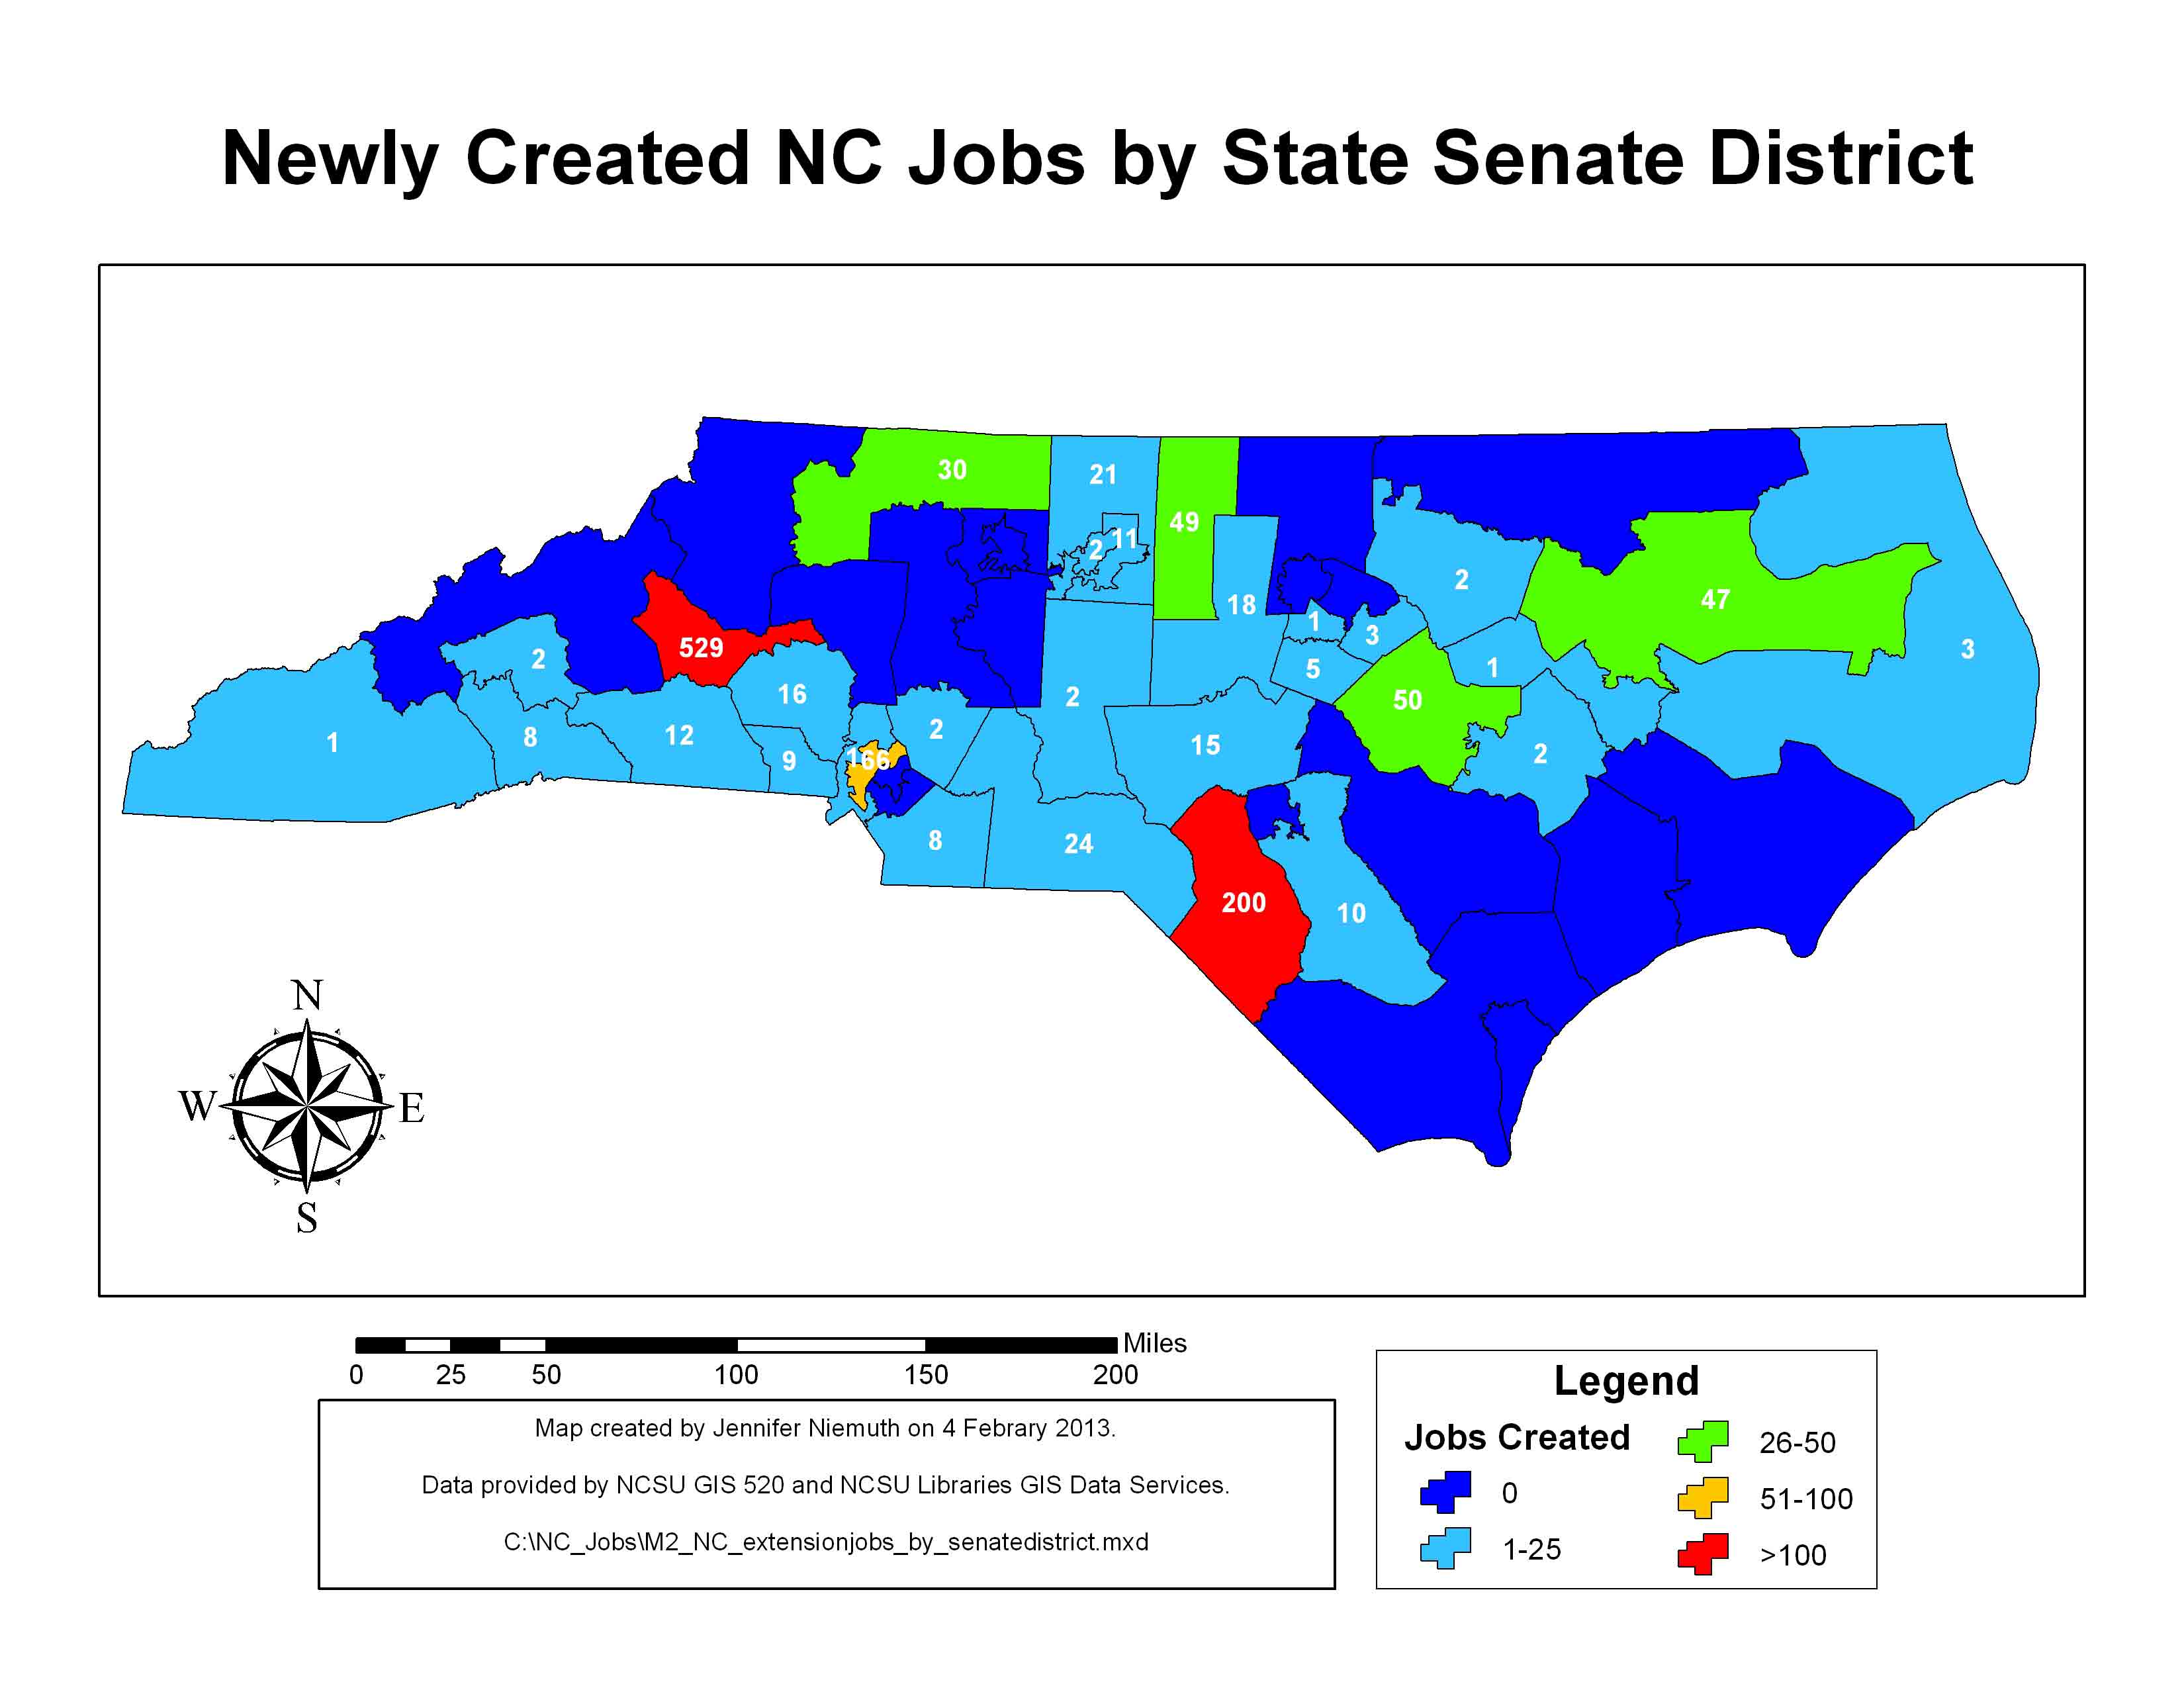 New jobs by state senate district